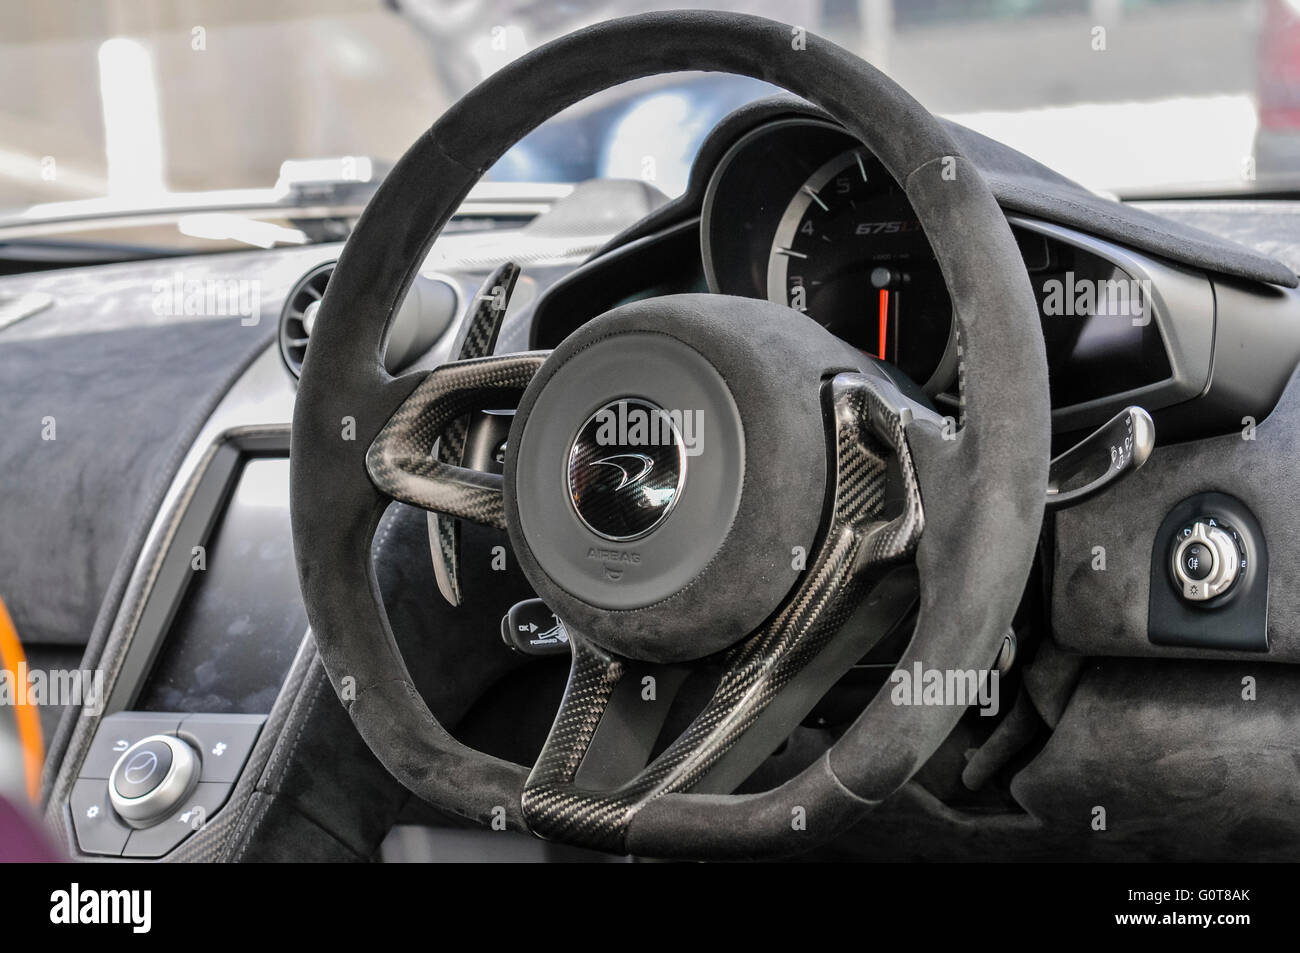 Steering wheel and dashboard of a McLaren 675LT hypercar Stock Photo